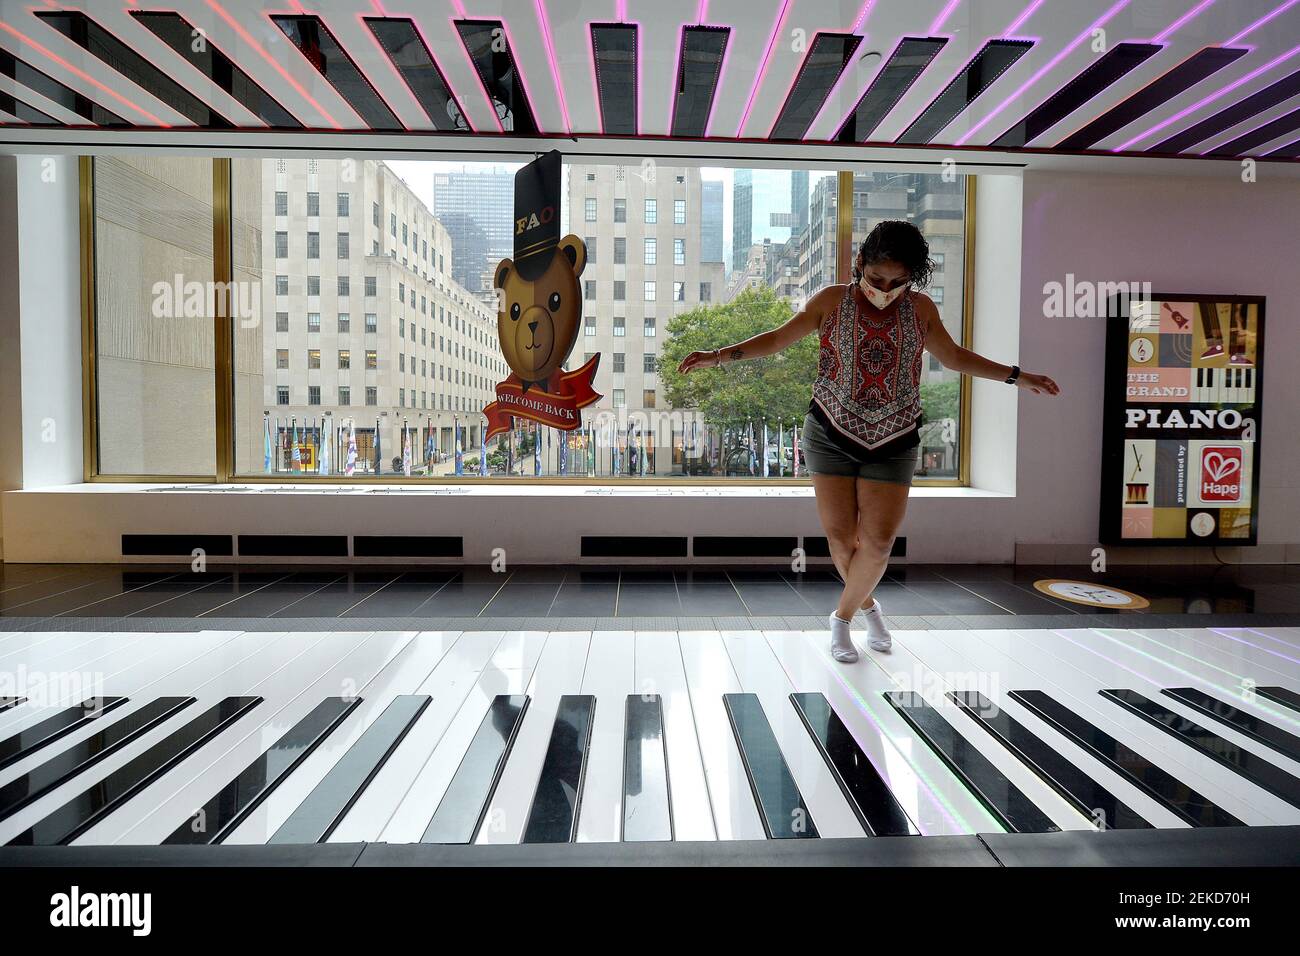 Liza Slack, visiting from Florida, plays on the large toe tap floor piano,  made famous in the movie “Big” at the newly reopened famed toy store FAO  Schwarz at Rockefeller Center in